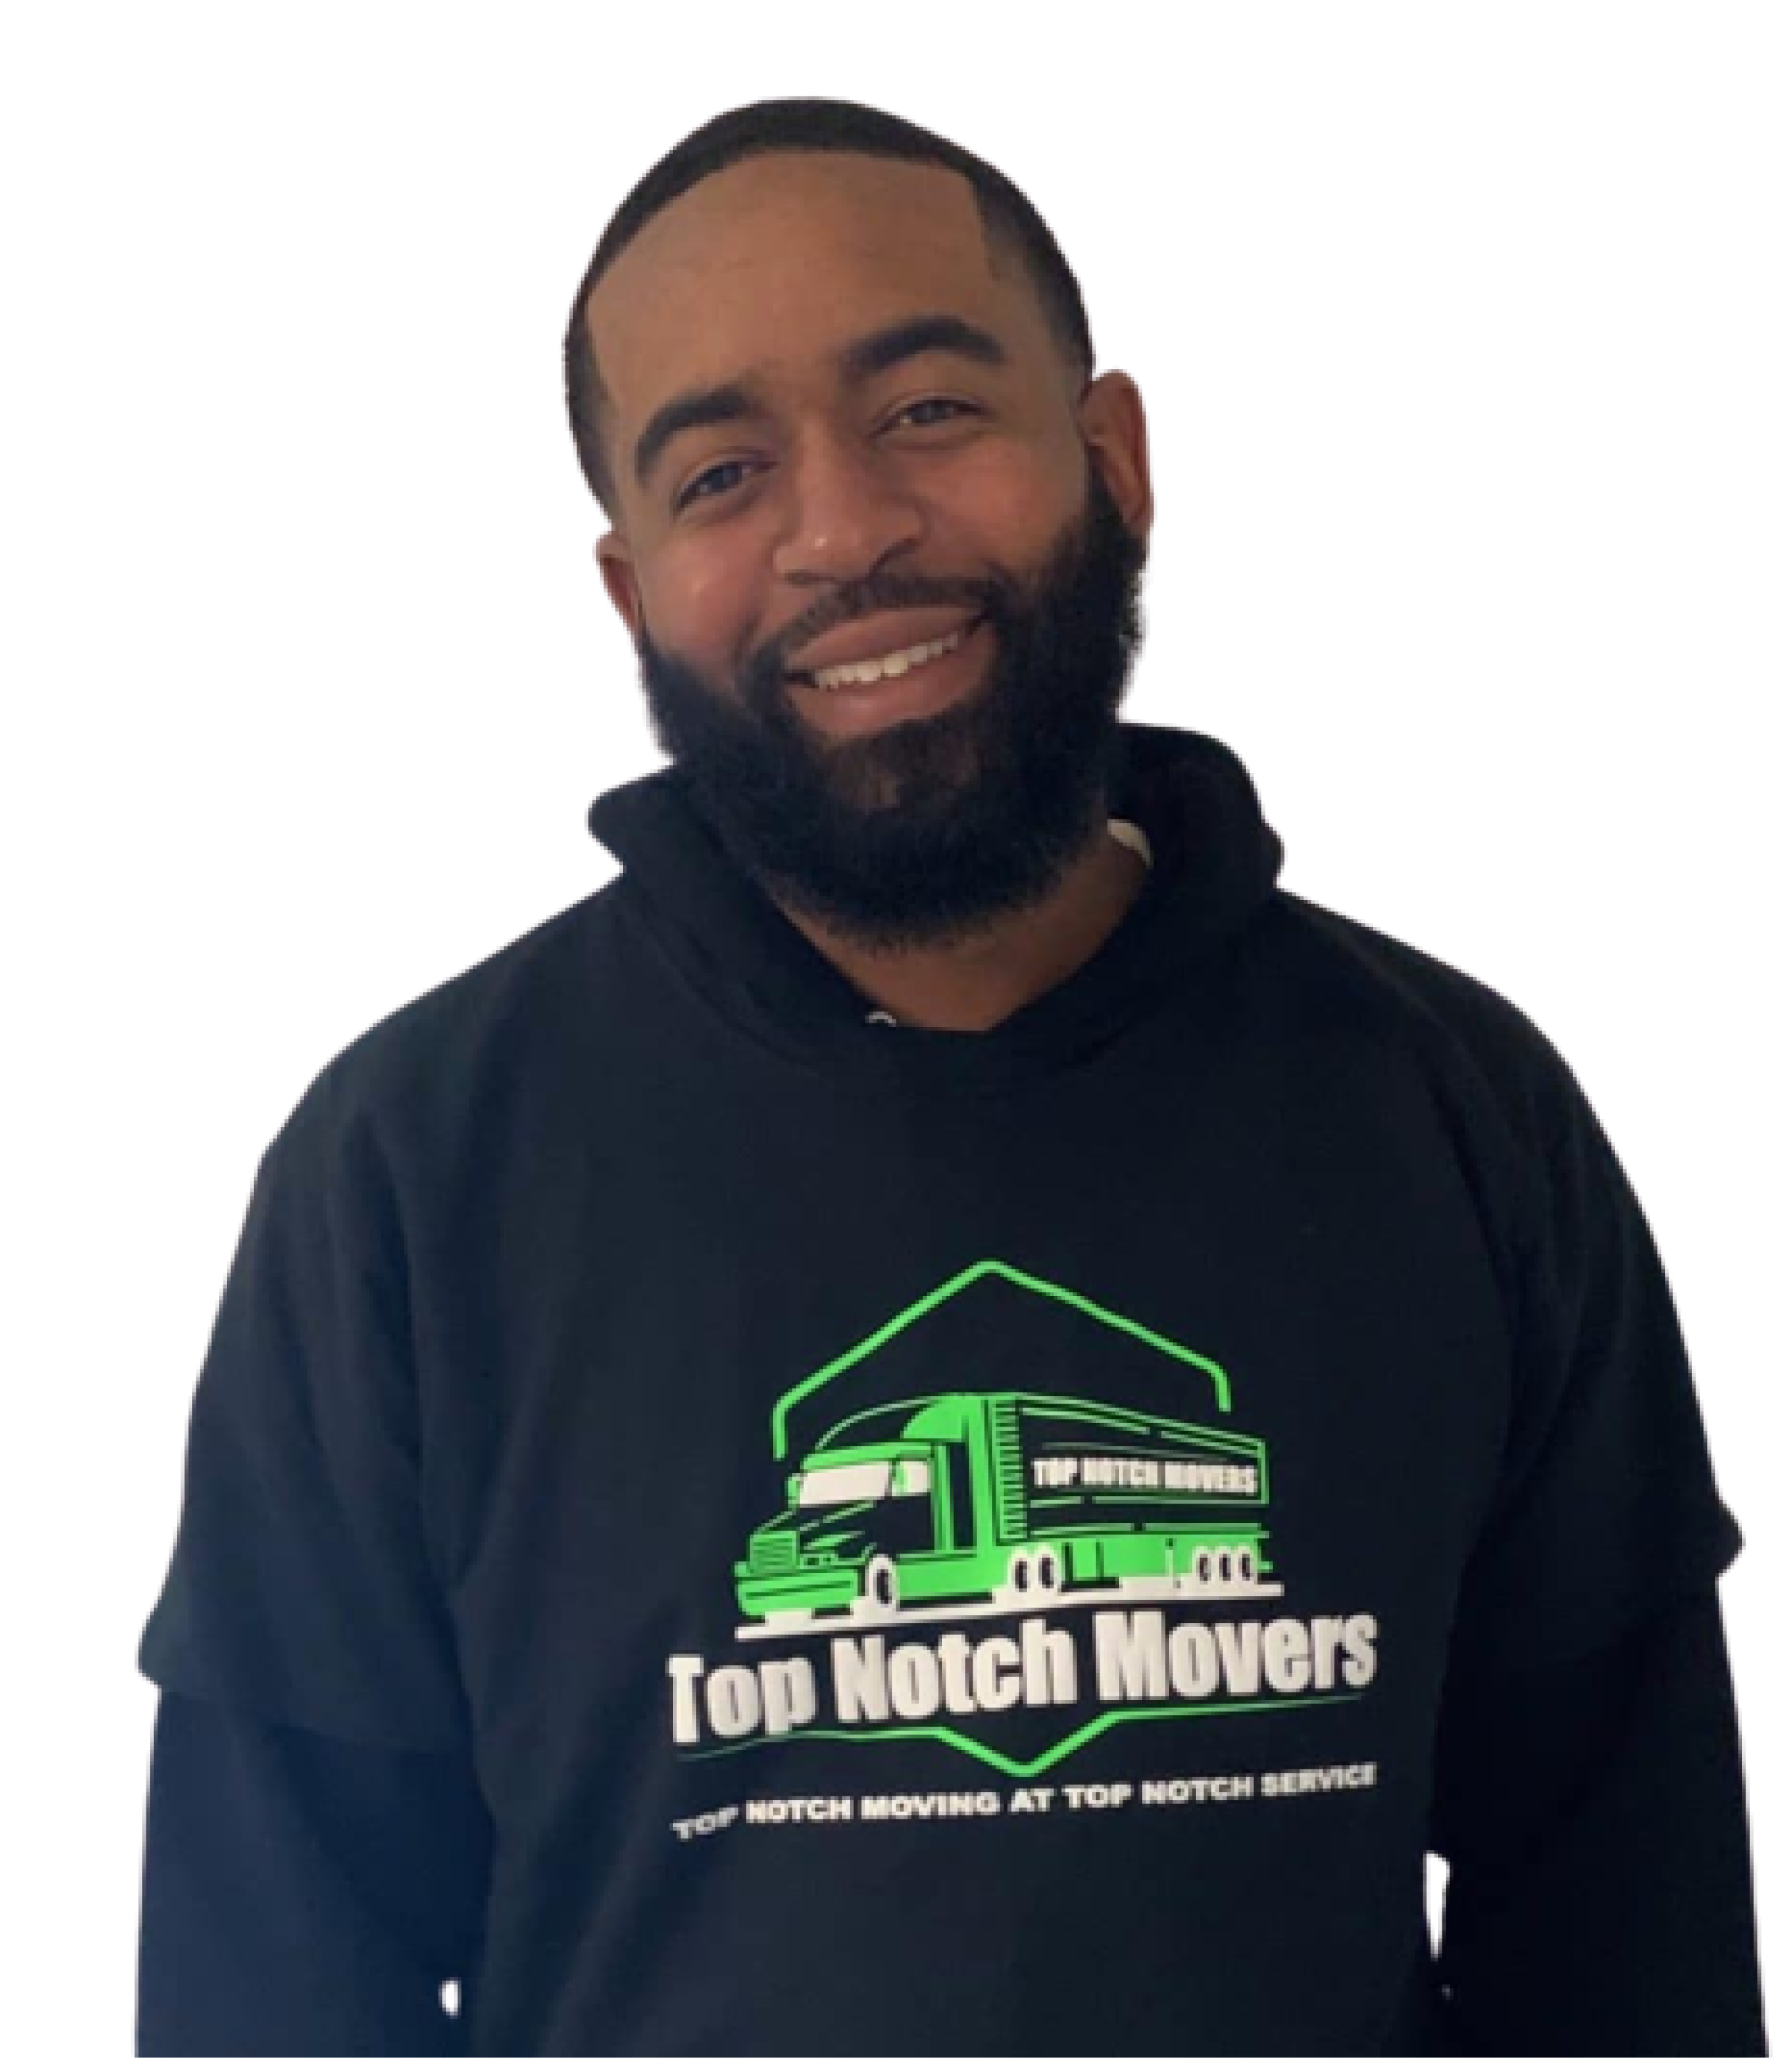 TOP NOTCH MOVING SERVICES FOUNDER